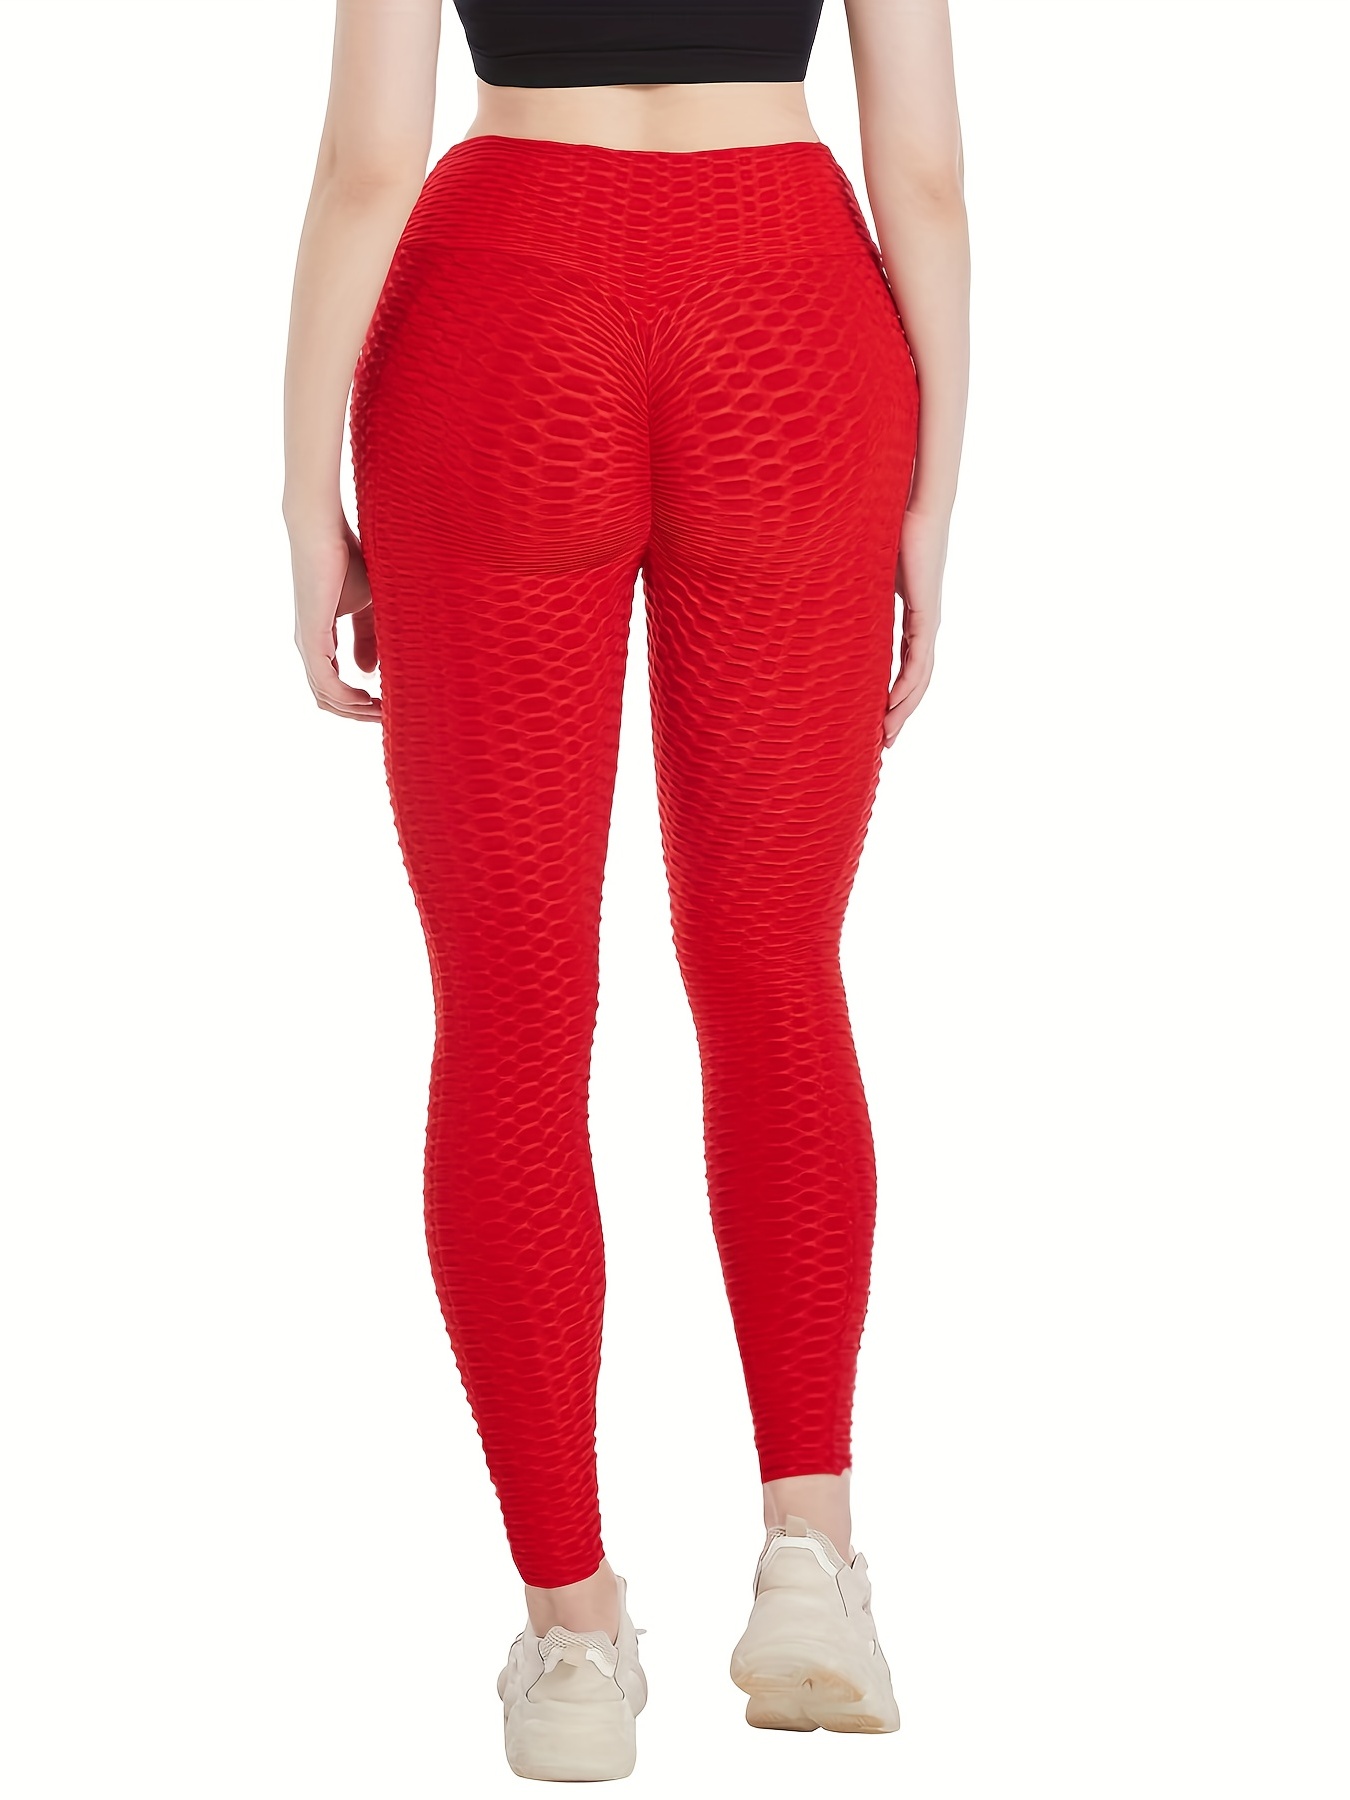 Red High Waisted Leggings Ladies Tights Bum Lift Push up Pants